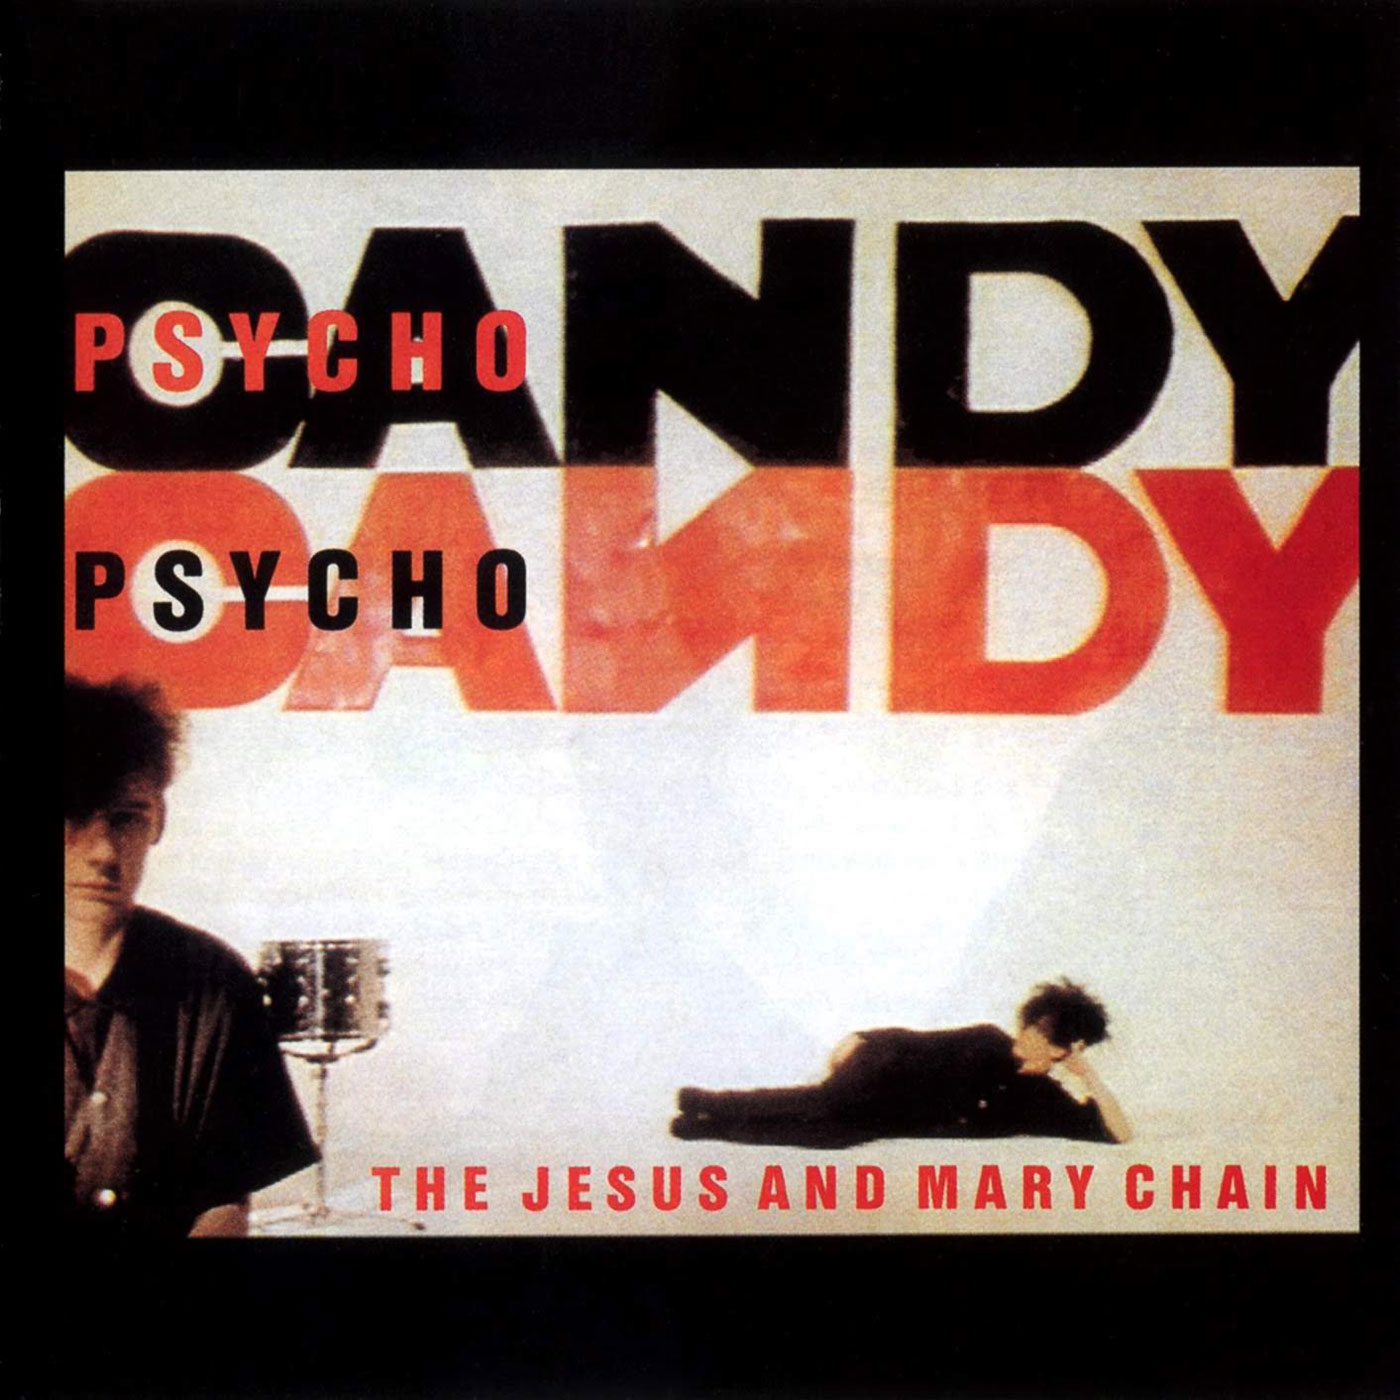 560 The Jesus and Mary Chain – Psychocandy